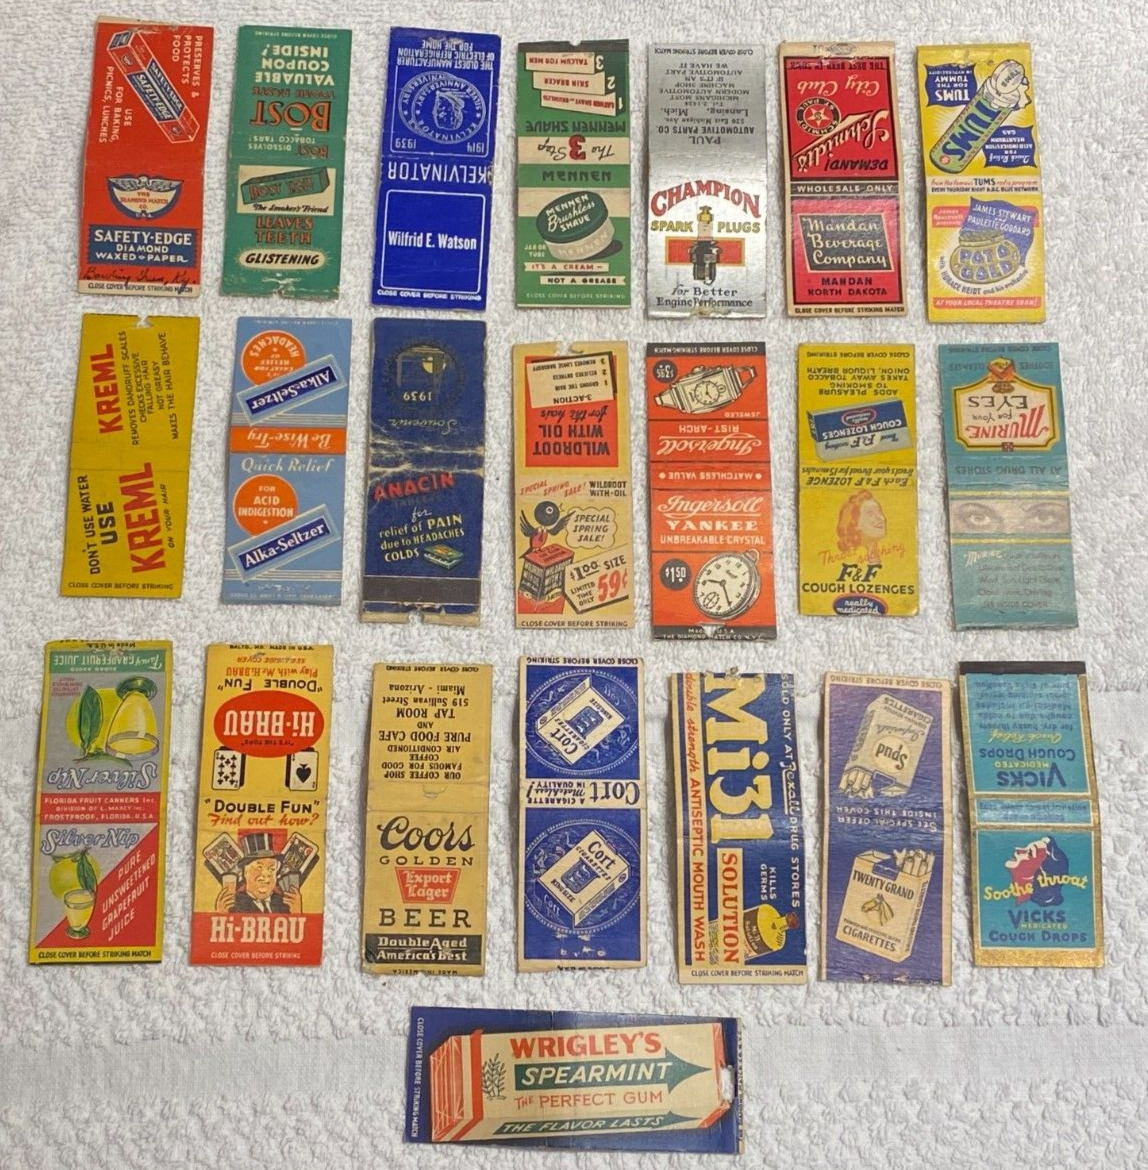 22 Vintage 1930's Matchbook Covers - Rare Lot Wrigley's / Coors / Tums / Vicks